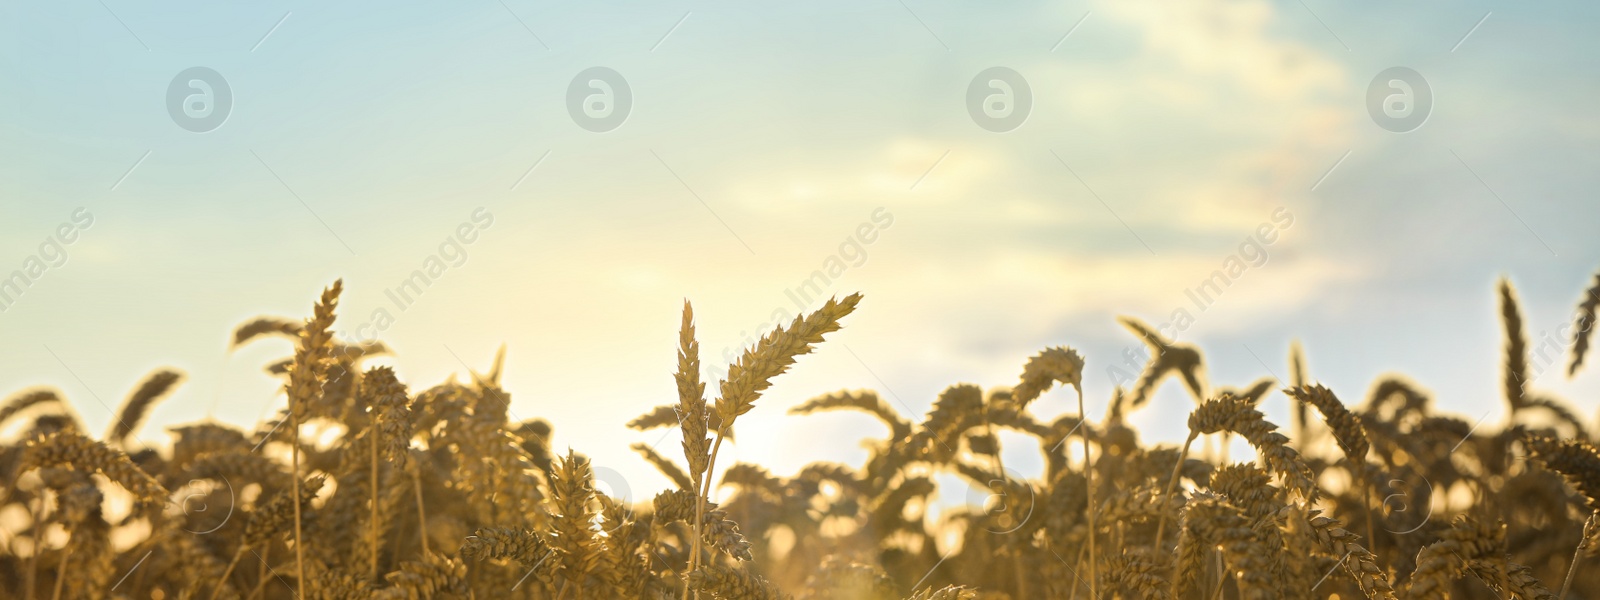 Image of Beautiful field with ripe wheat spikes on sunny day. Banner design